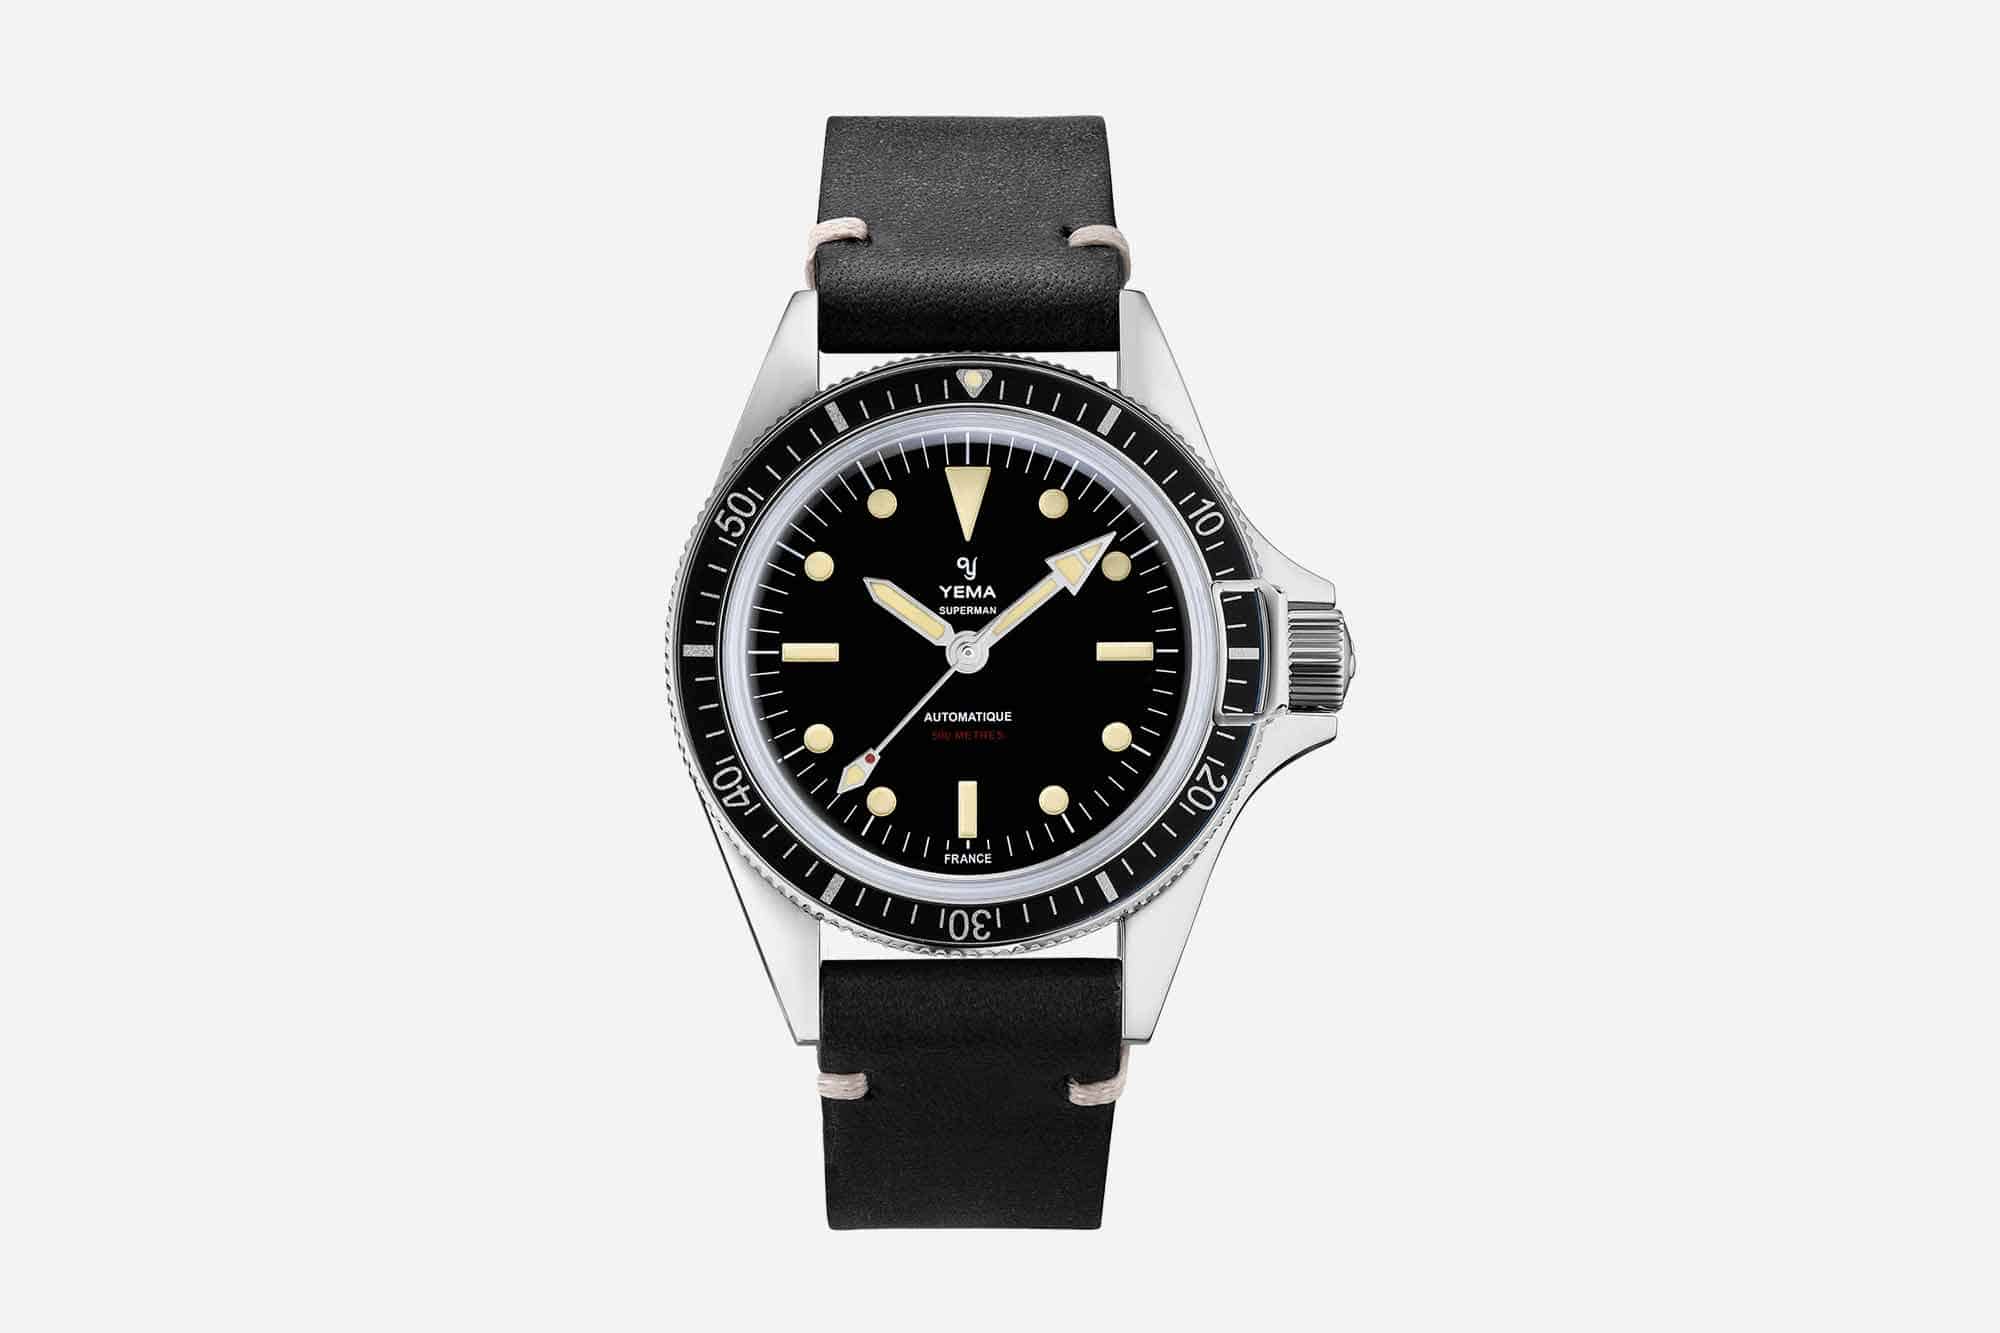 Yema Introduces the Superman 500, a Classic Diver with a Bunch of Subtle Updates